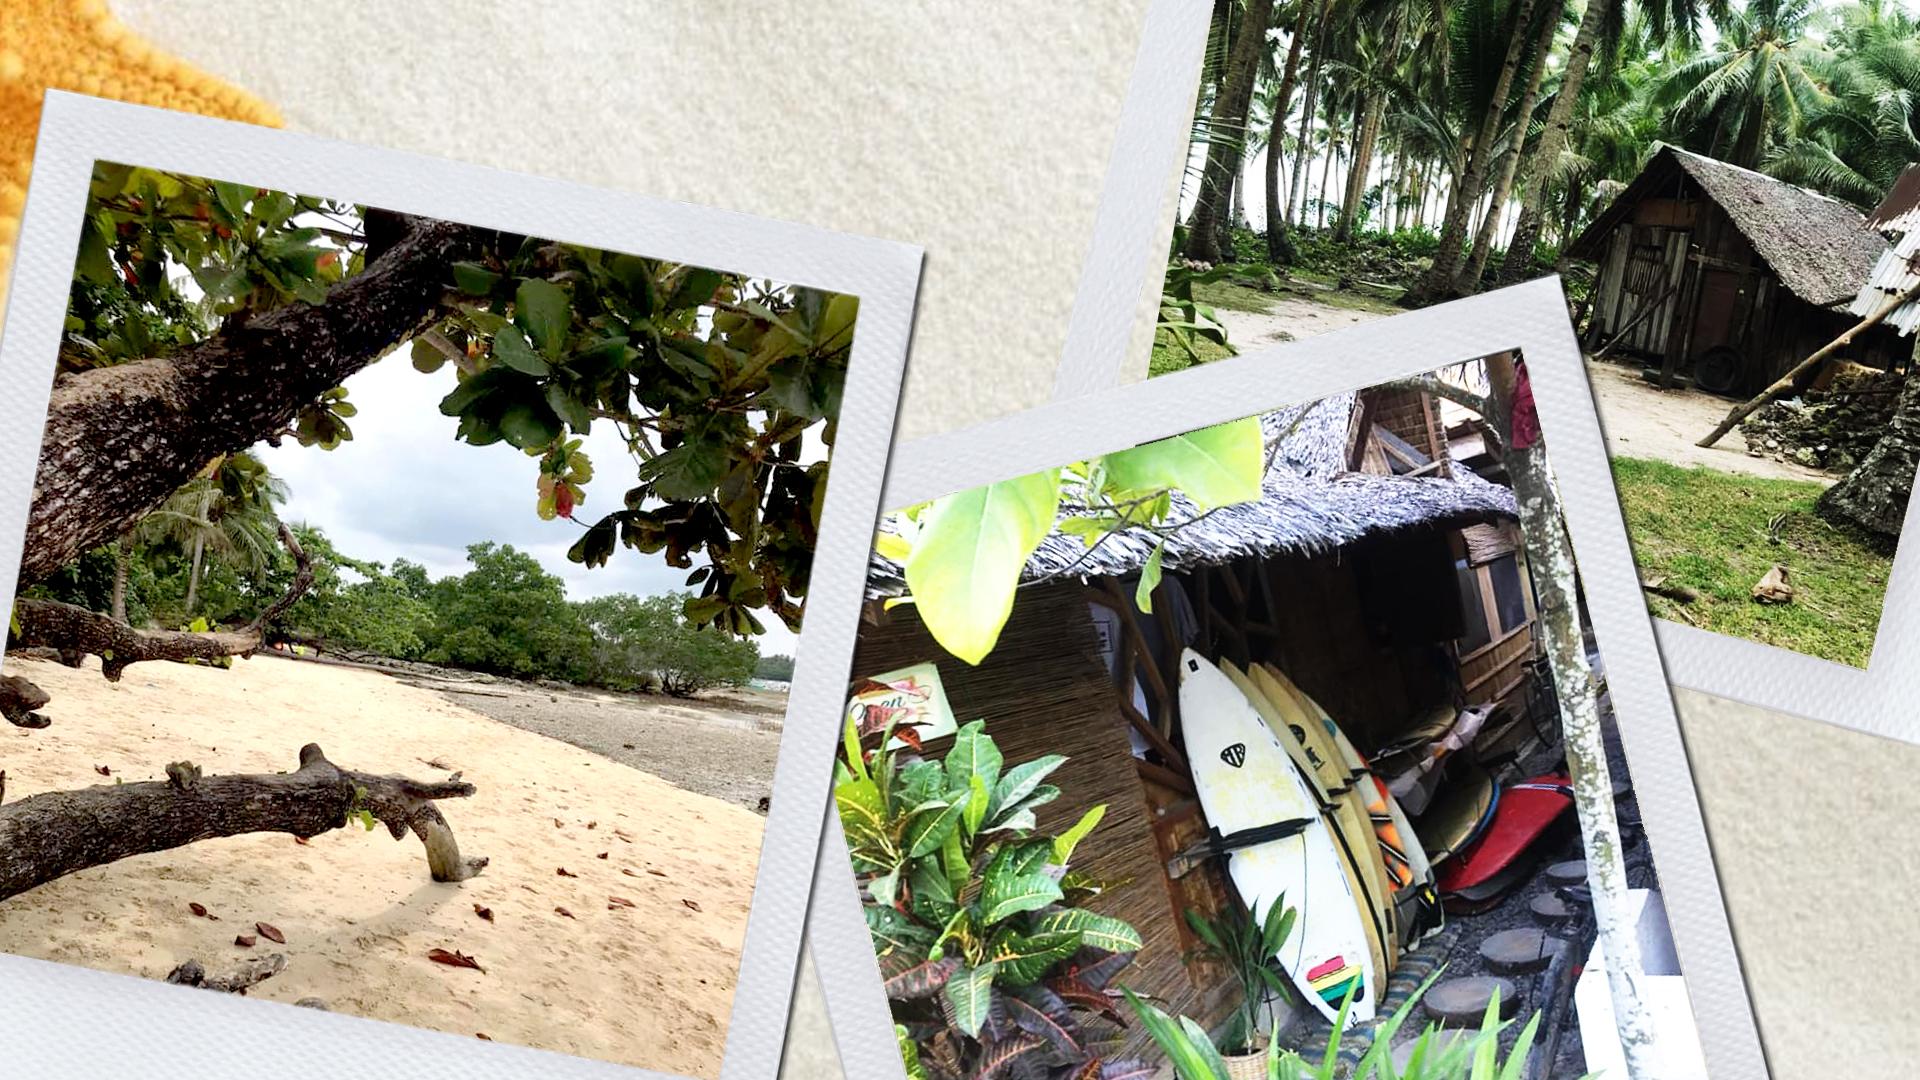 Uploading island life videos or beach escapades from the surfing capital of the Philippines used to take ages